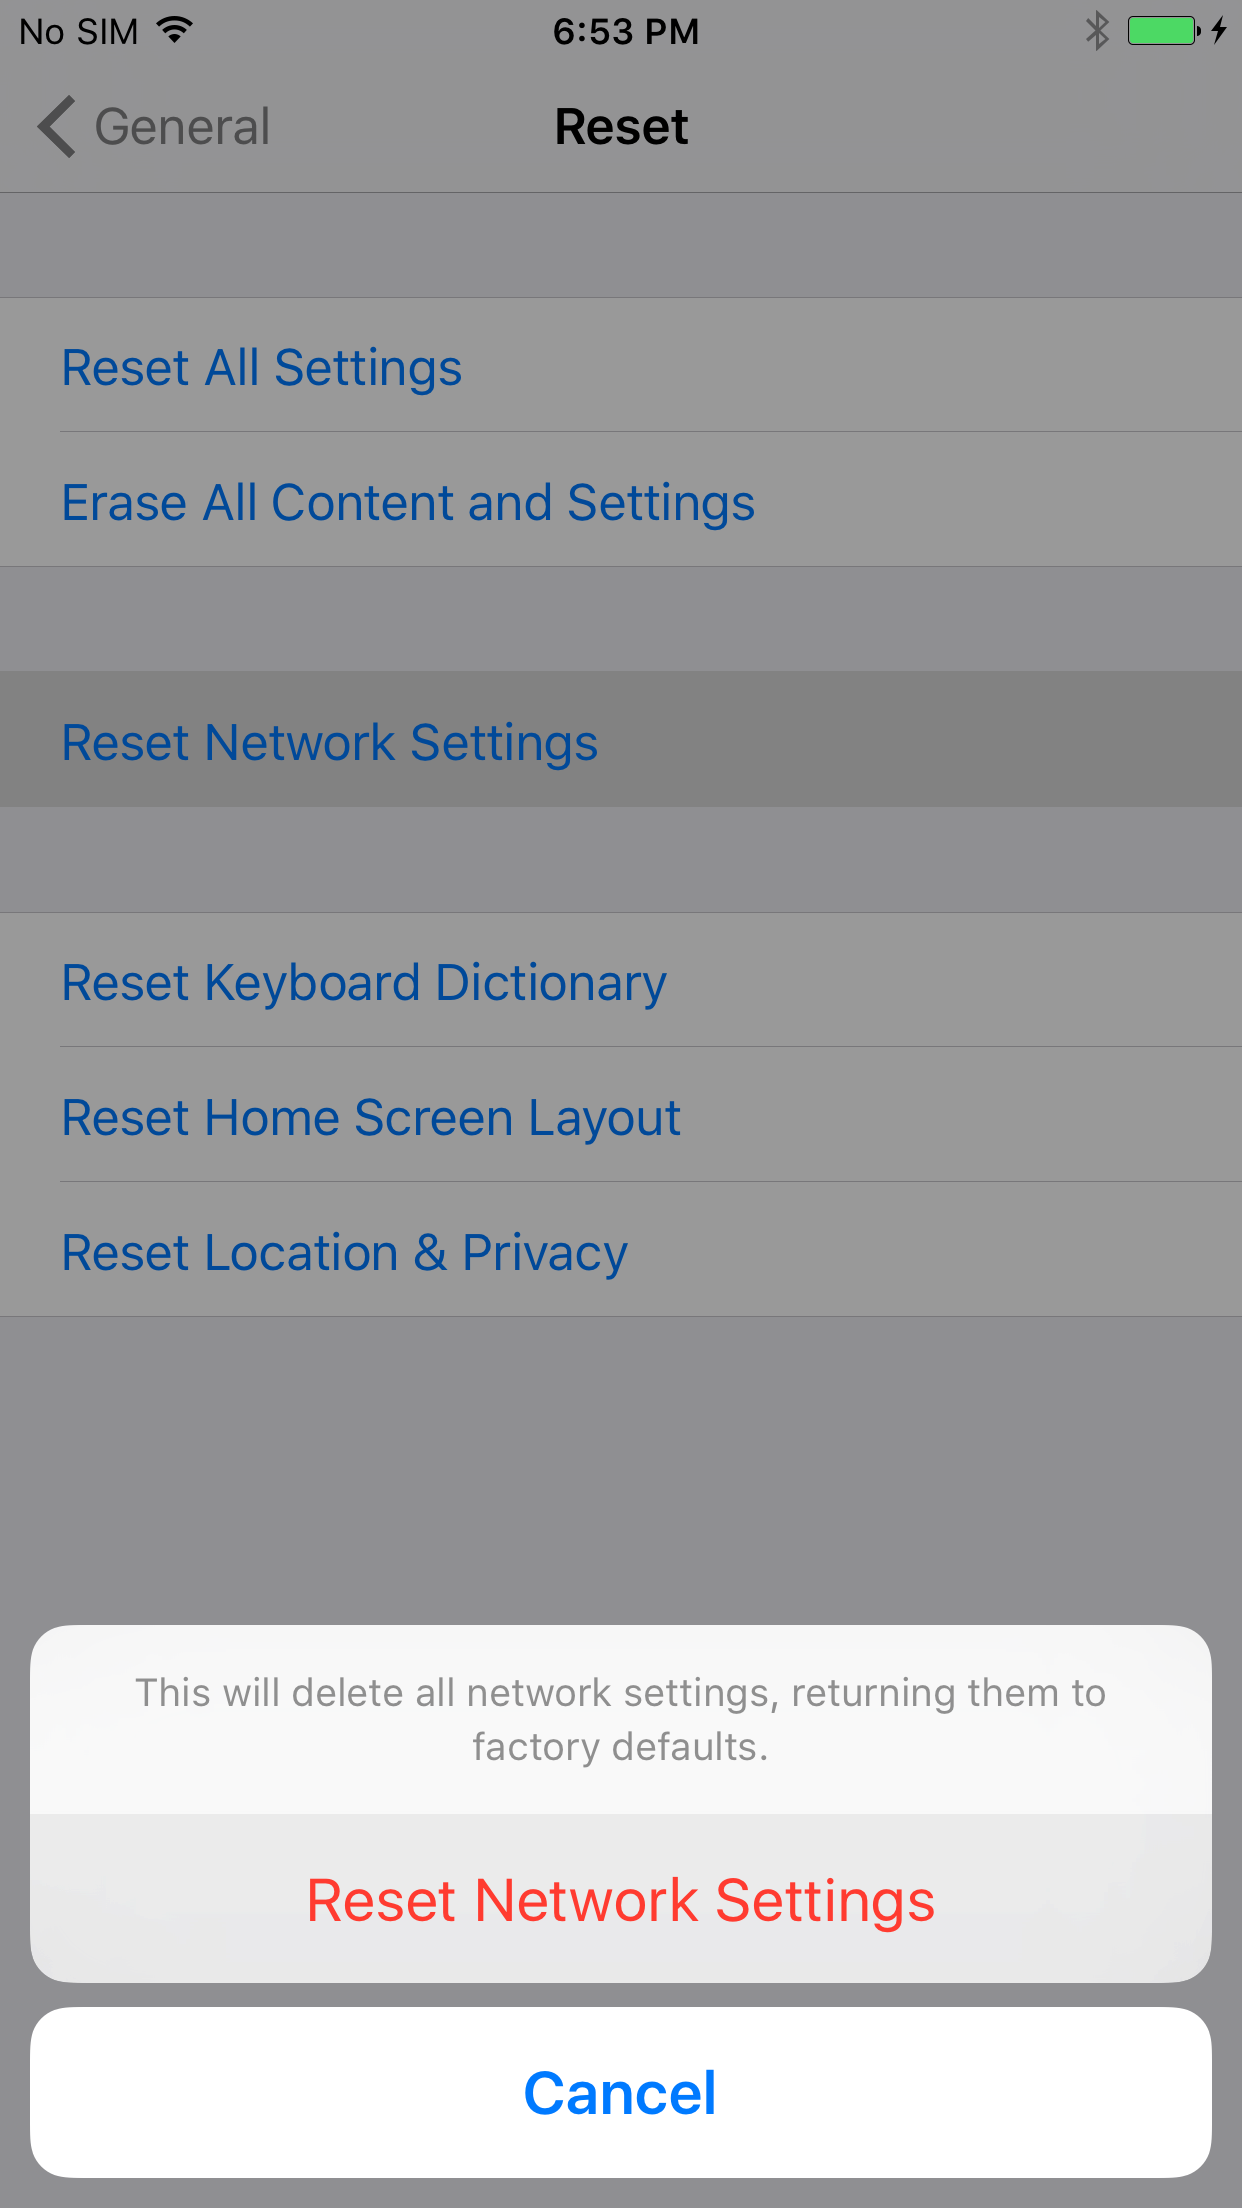 How to Reset Your Network Settings on the iPhone [Video]